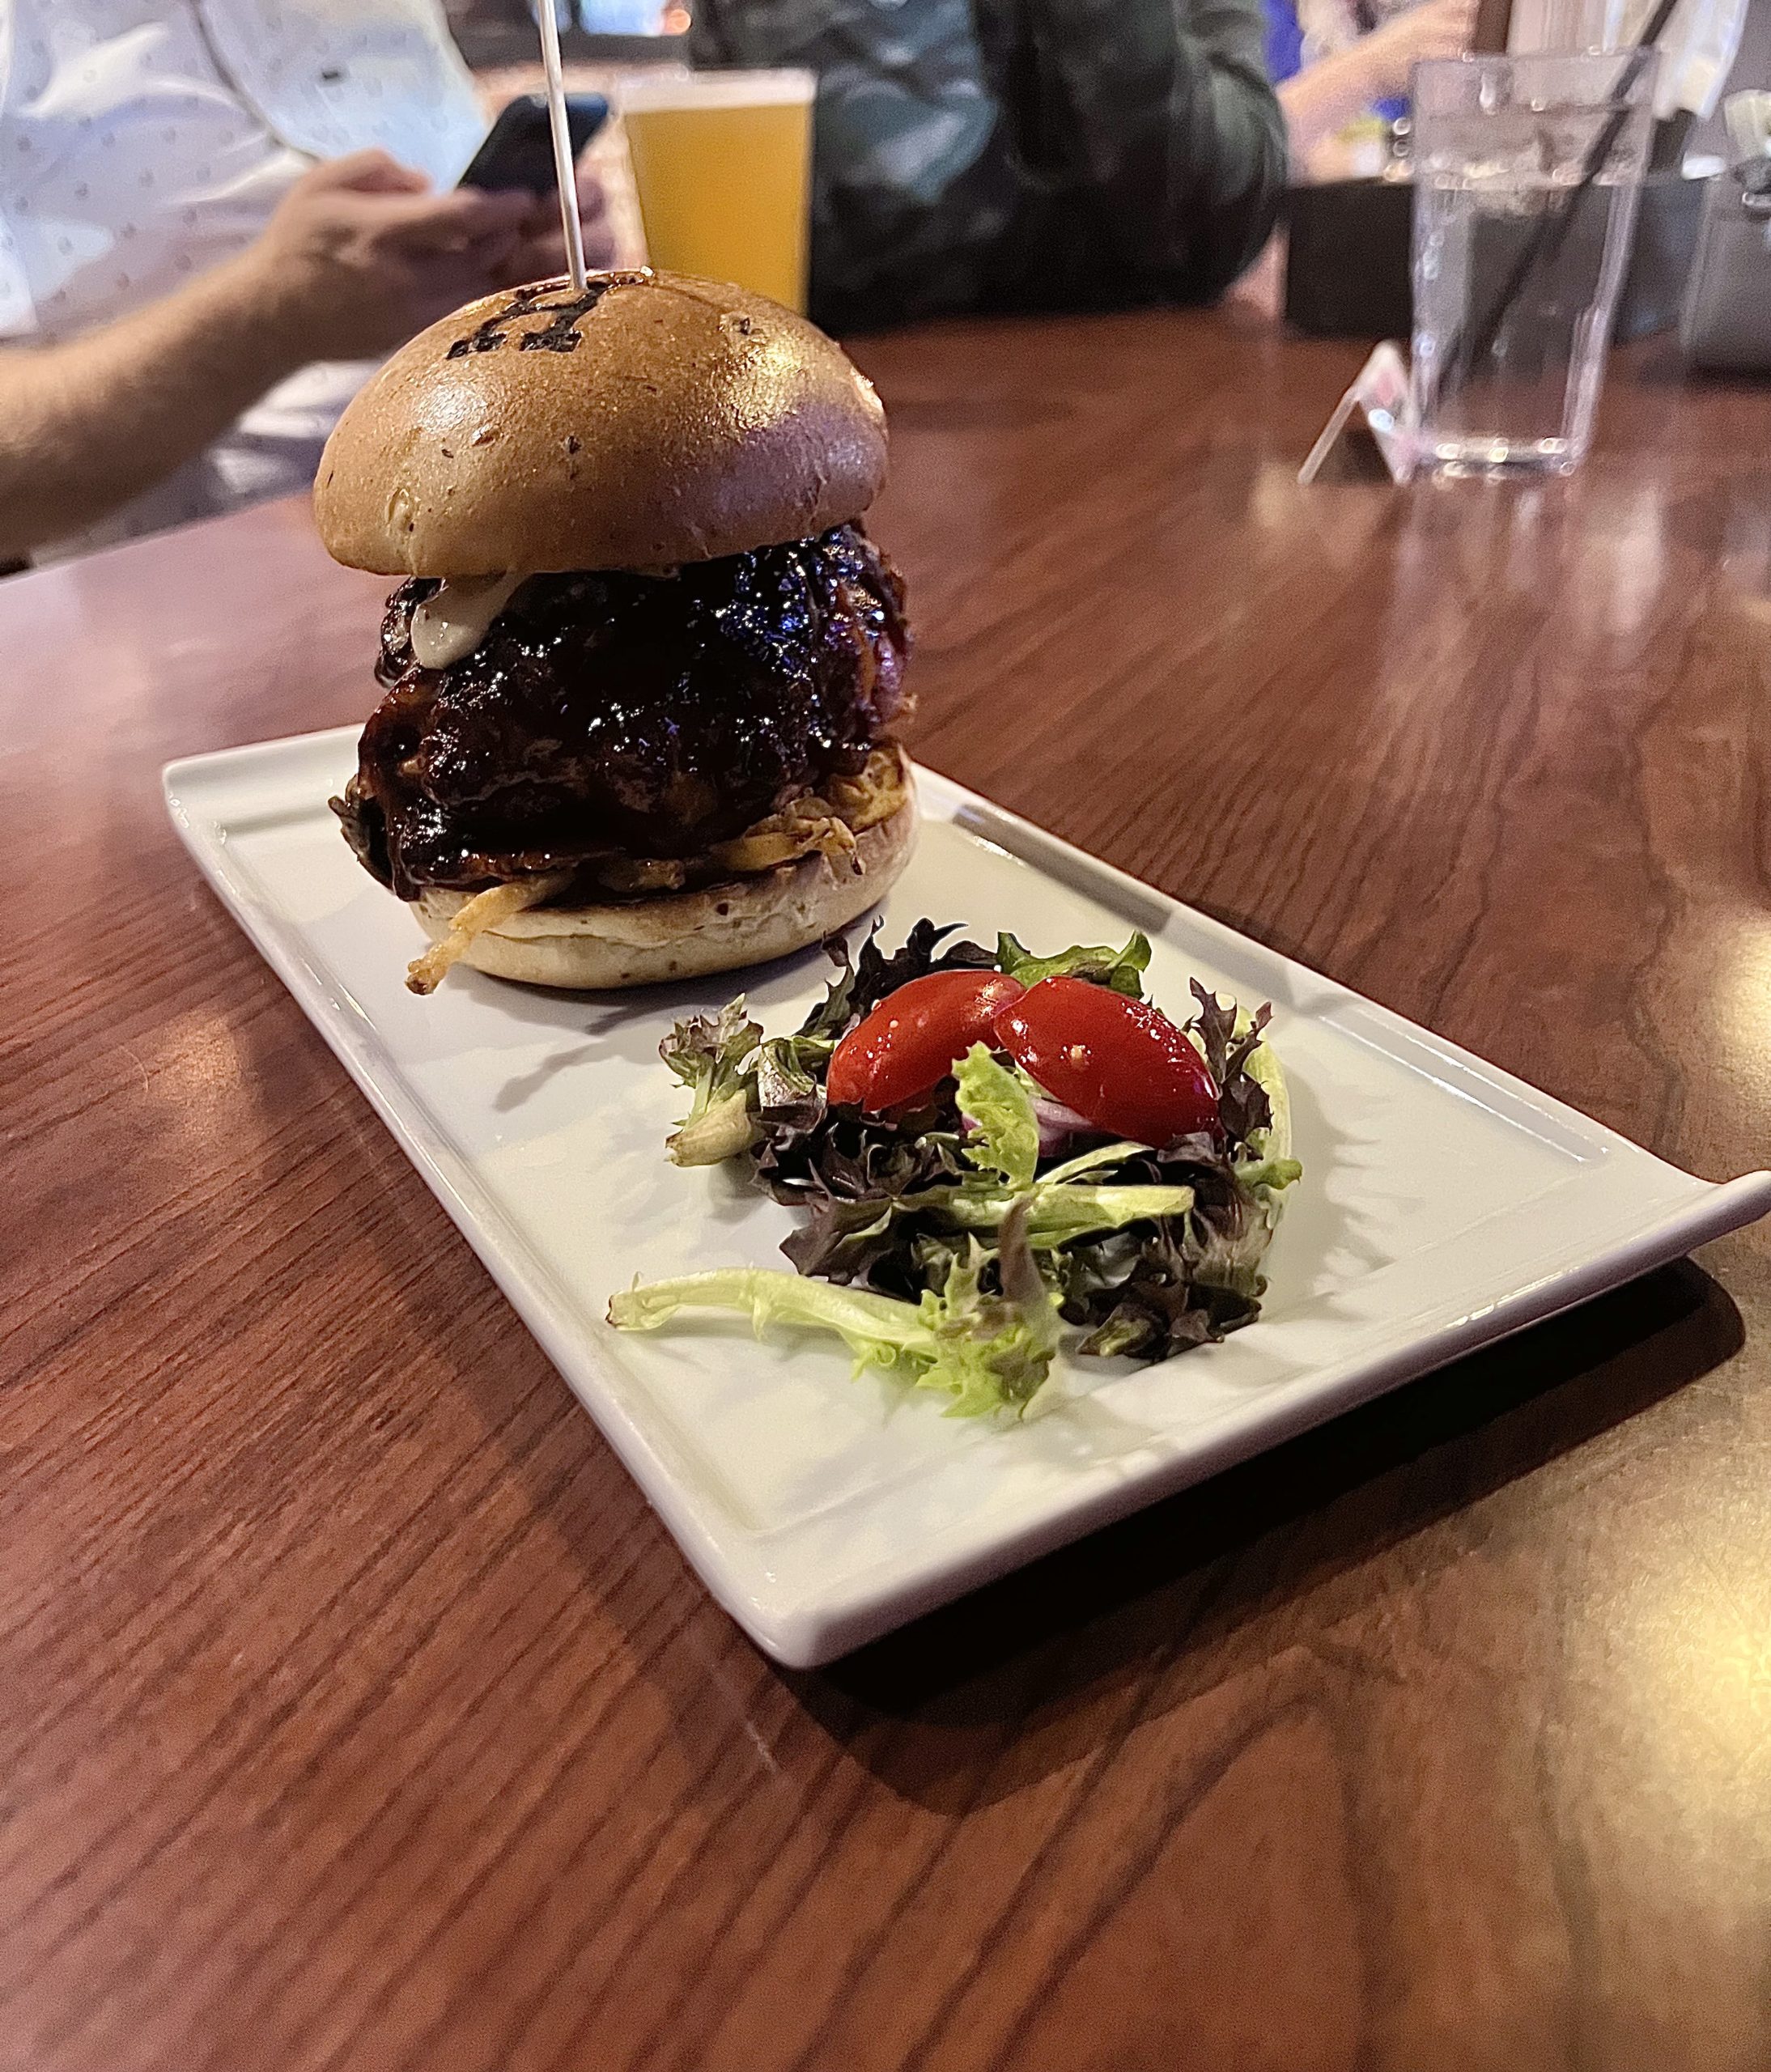 A very tall burger on a long white plate on a table with a small salad on the side